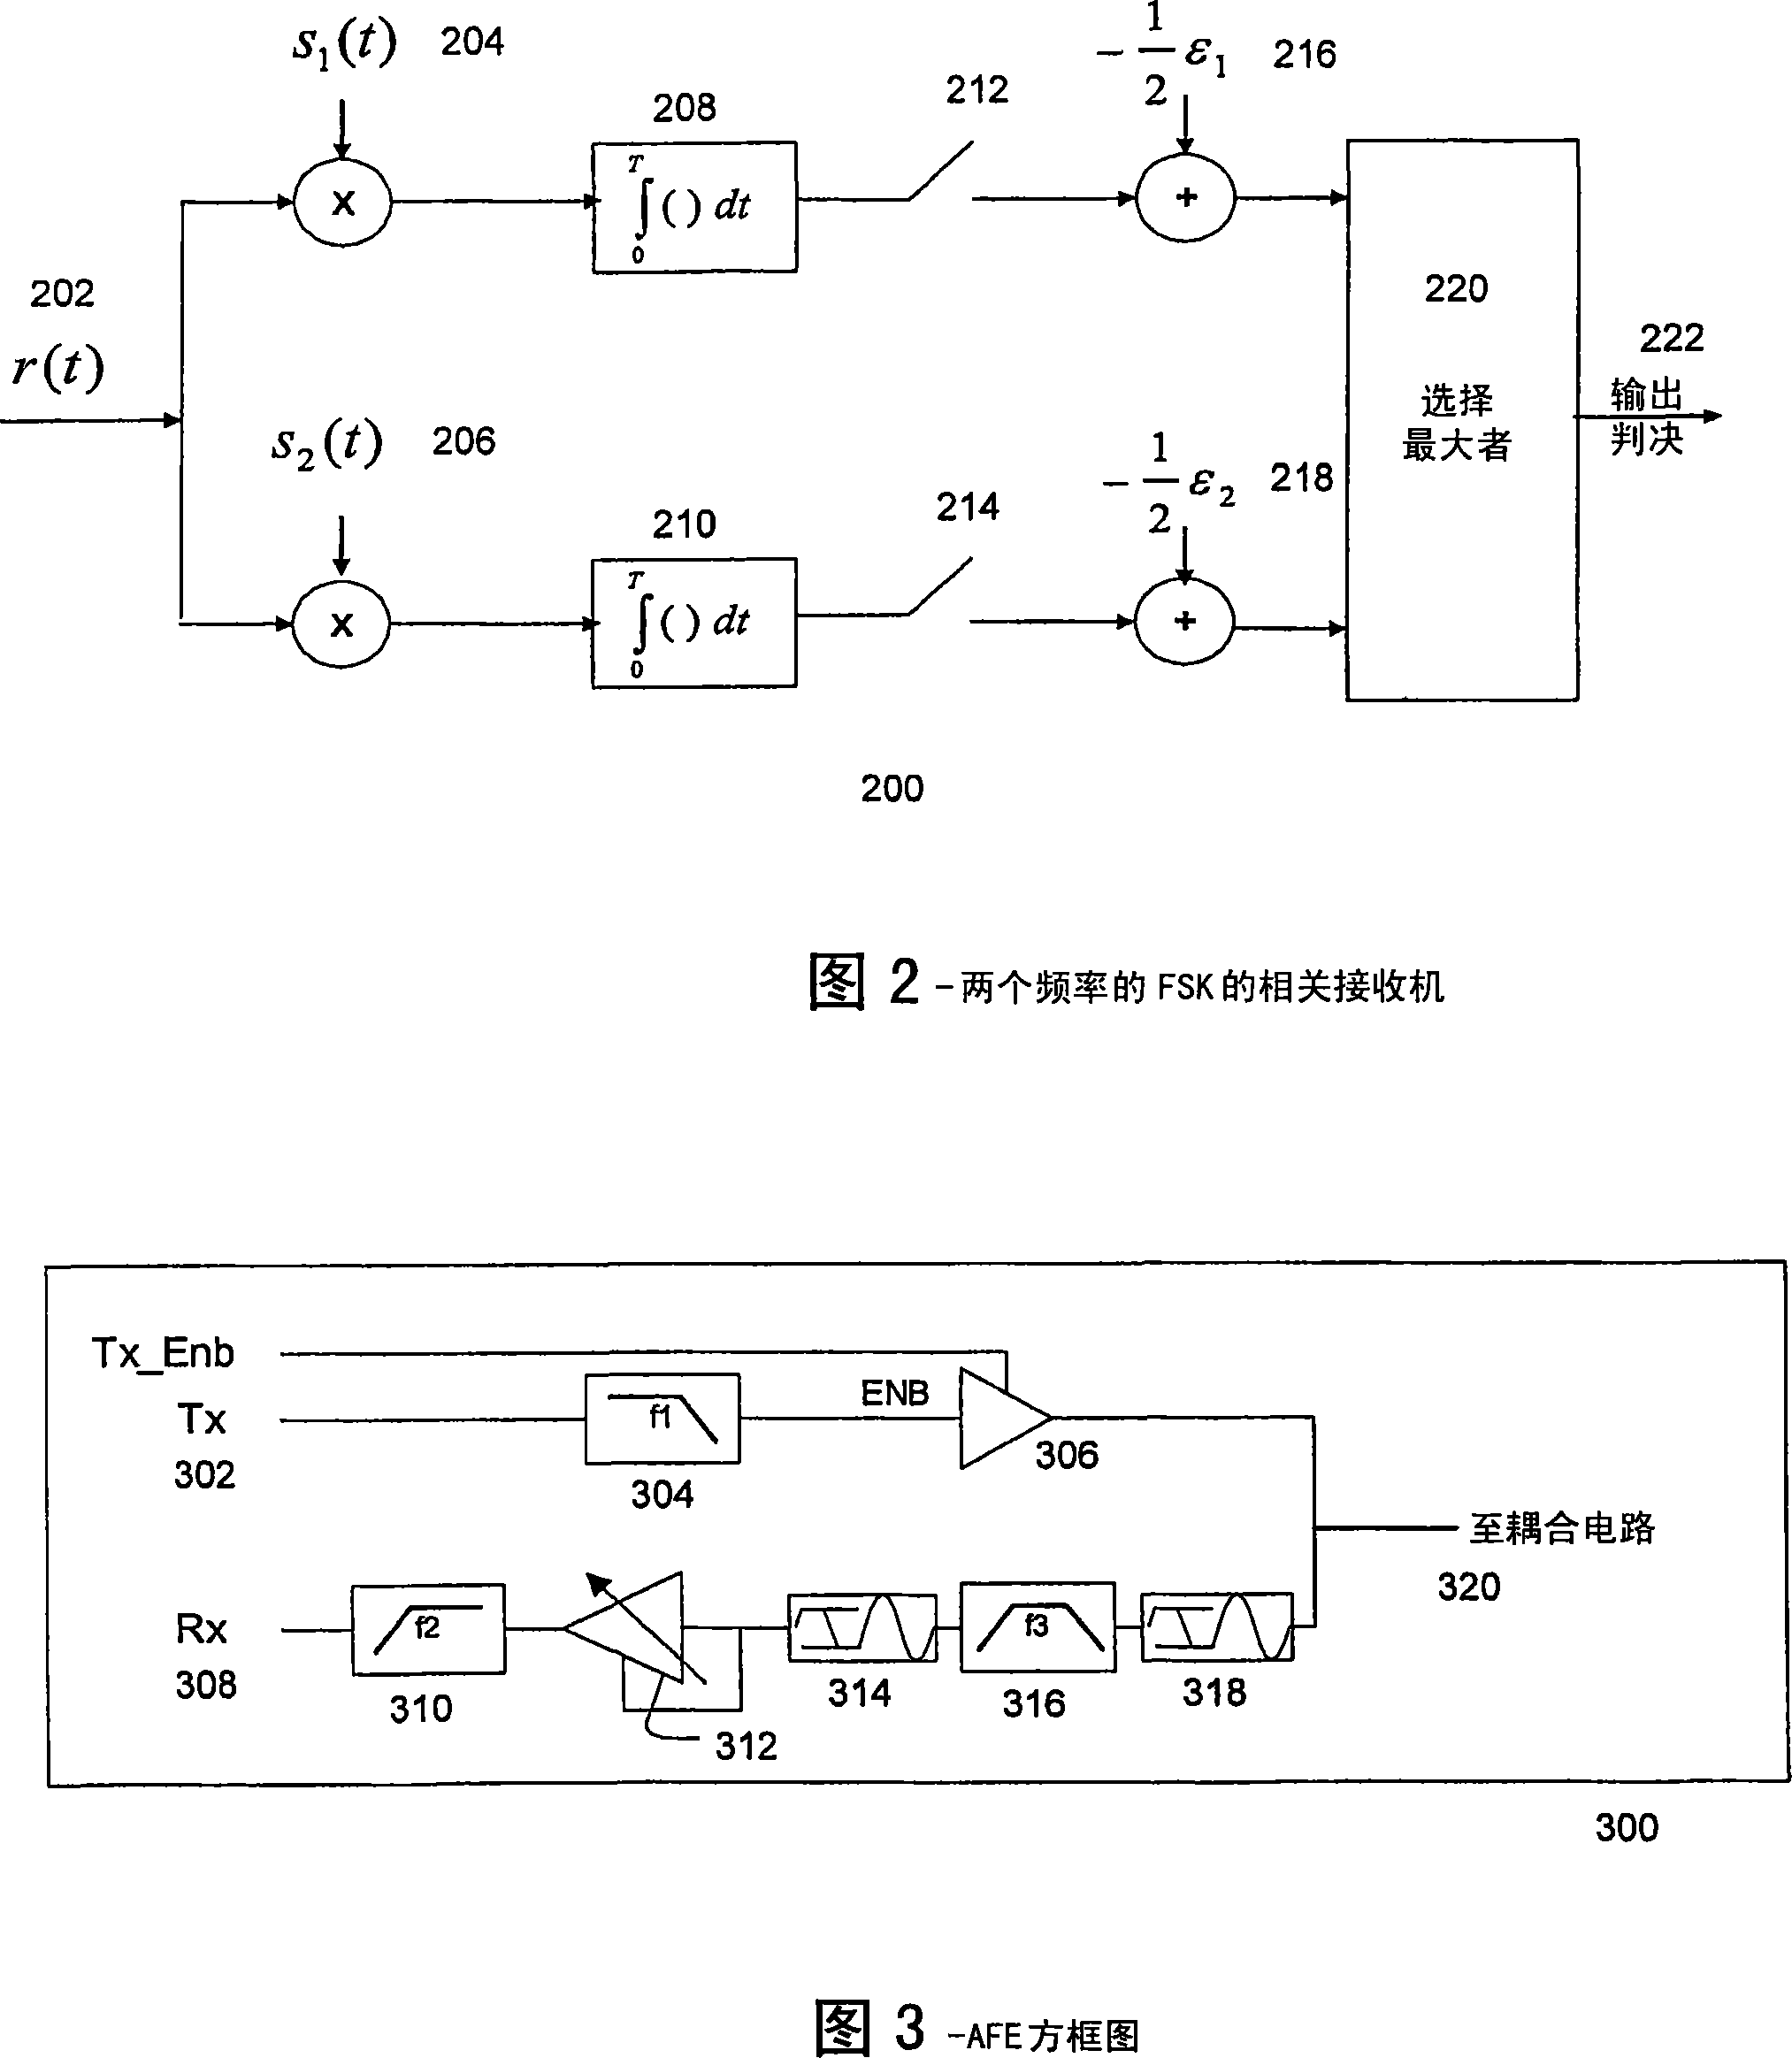 System and method for power line communications